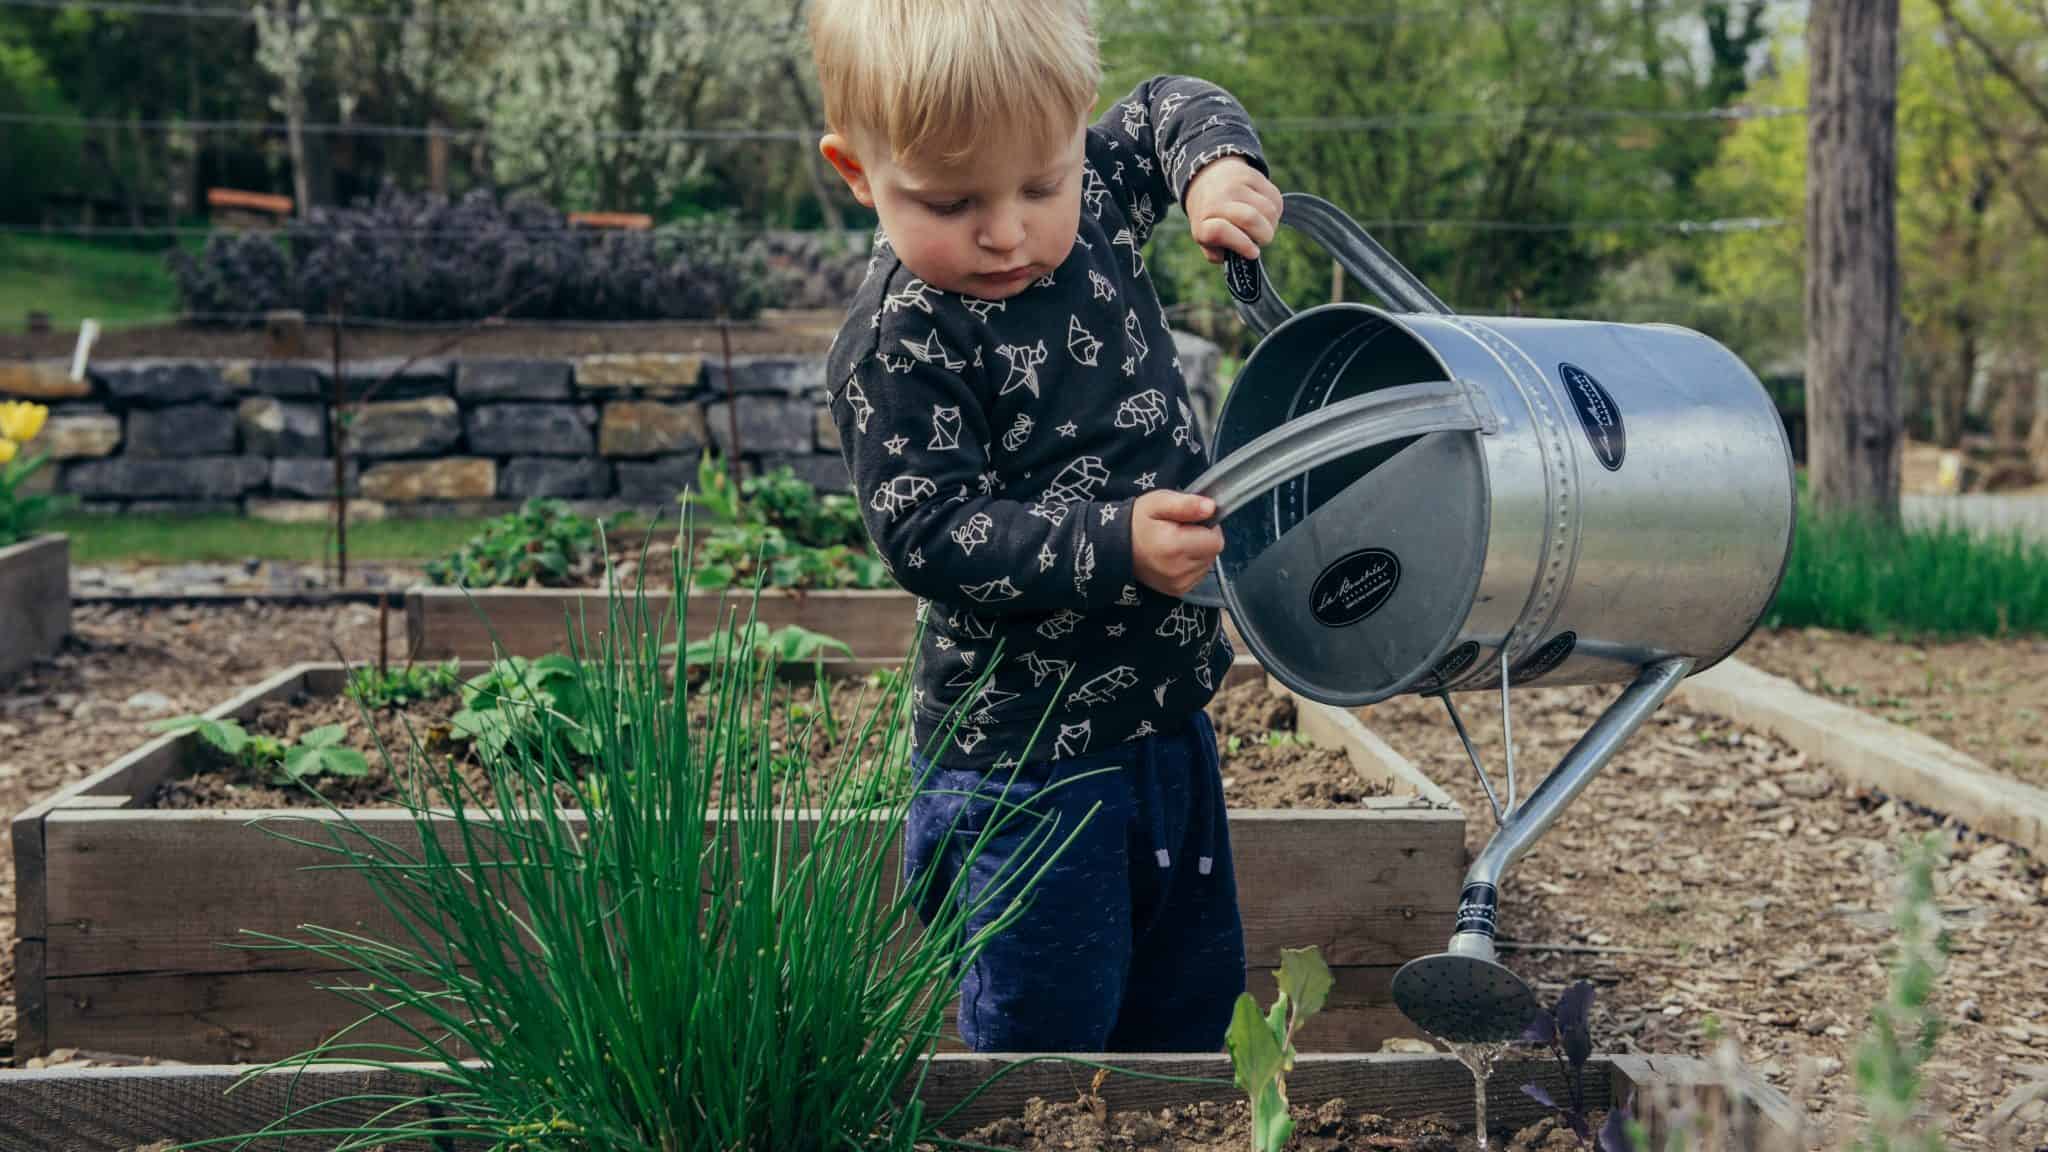 Kid with a watering can watering planters